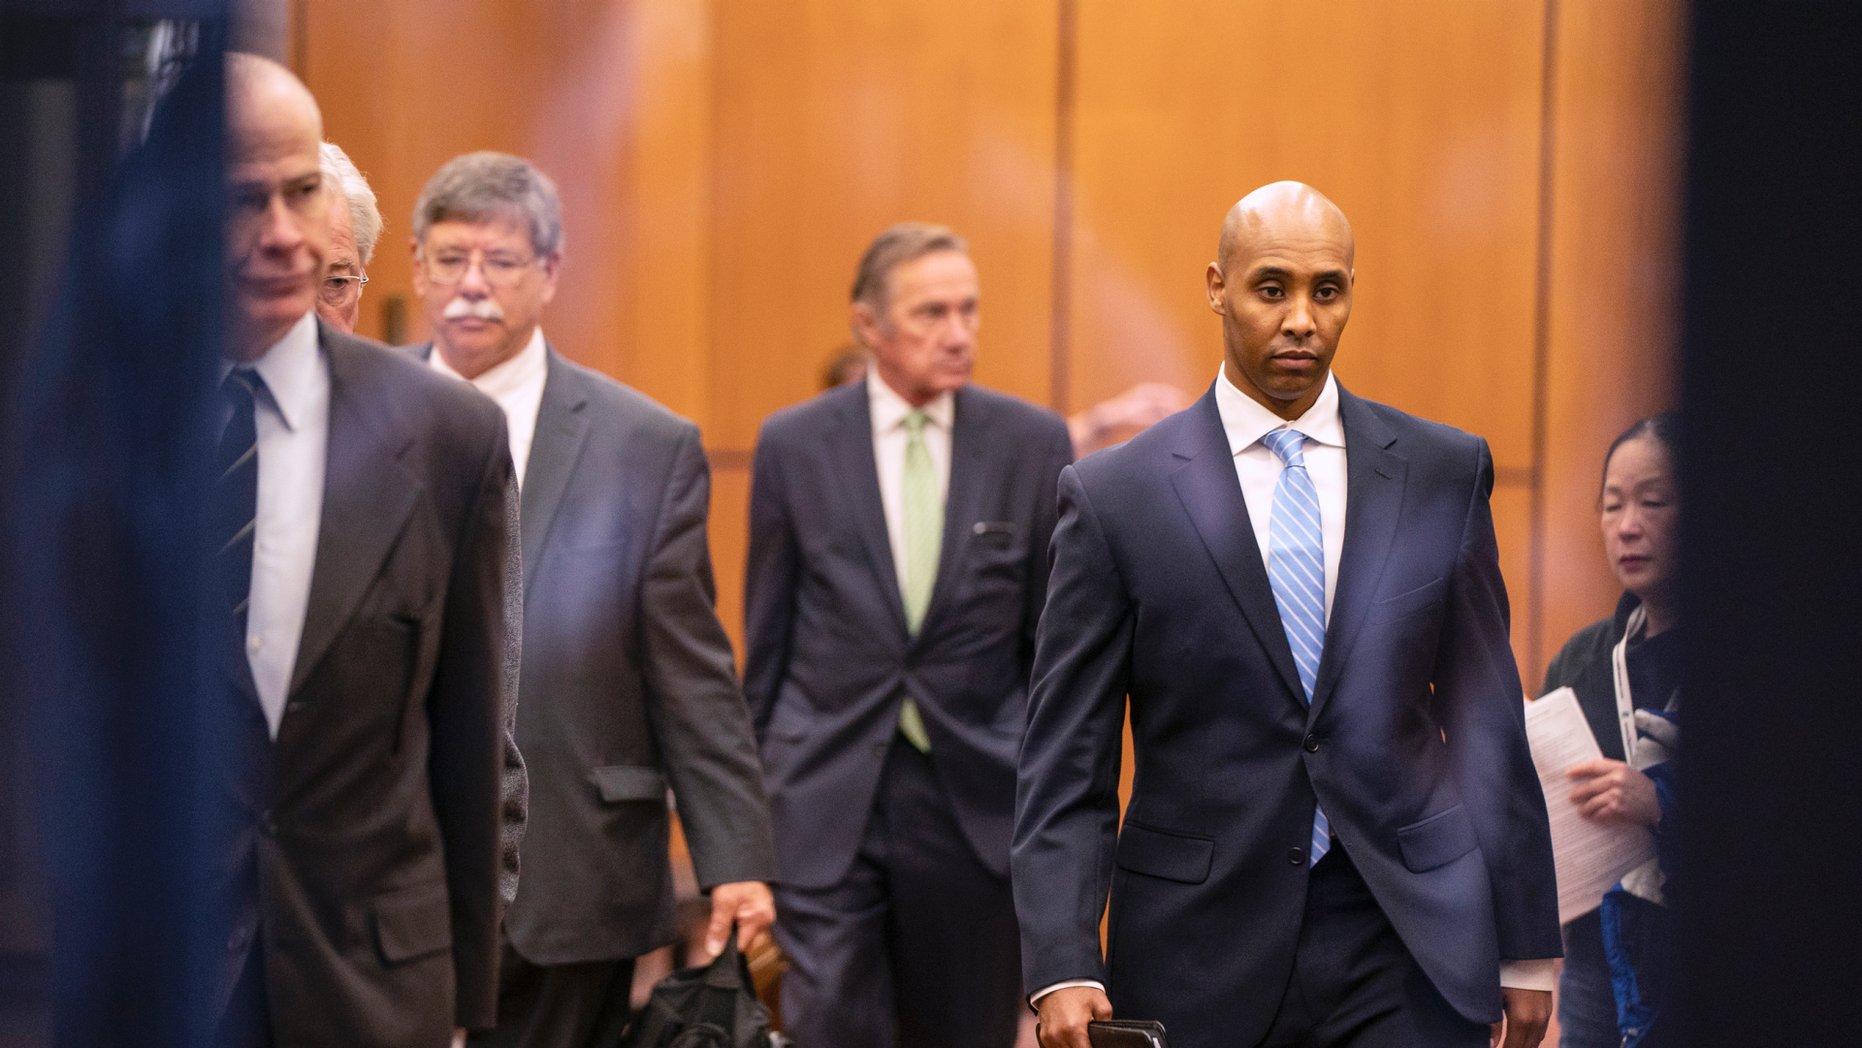 Former Minneapolis police officer, Mohamed Noor, crosses the lobby of the elevators at the Hennepin County Government Center with his team of lawyers in Minneapolis on Friday, April 26, 2019. (Leila Navidi / Star Tribune via AP )